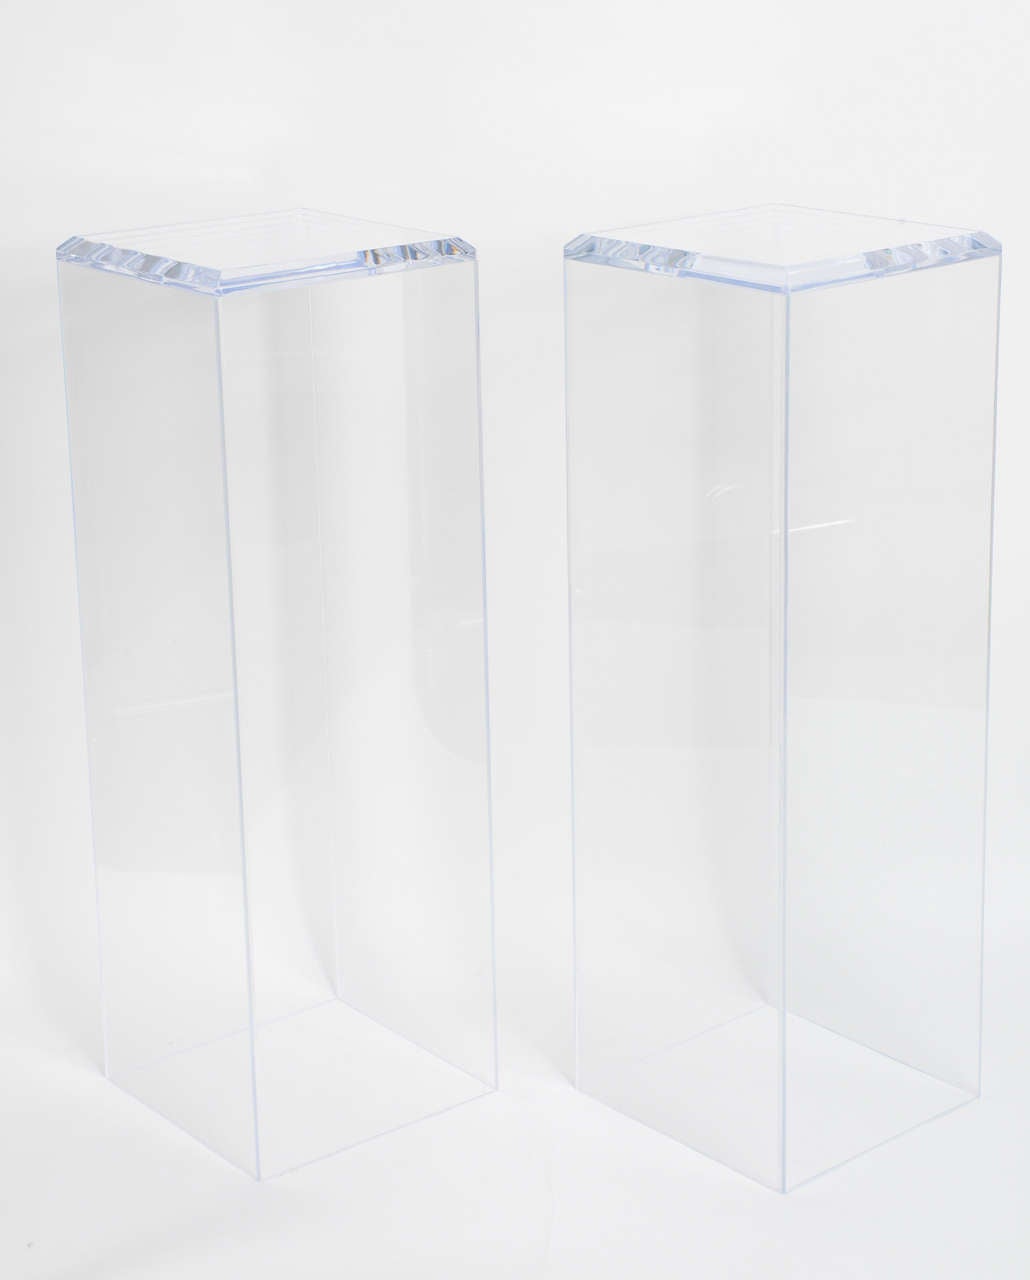 Pair of contemporary, clear, floating  lucite pedestals.

Please feel free to contact us directly for a shipping quote or any additional information by clicking 